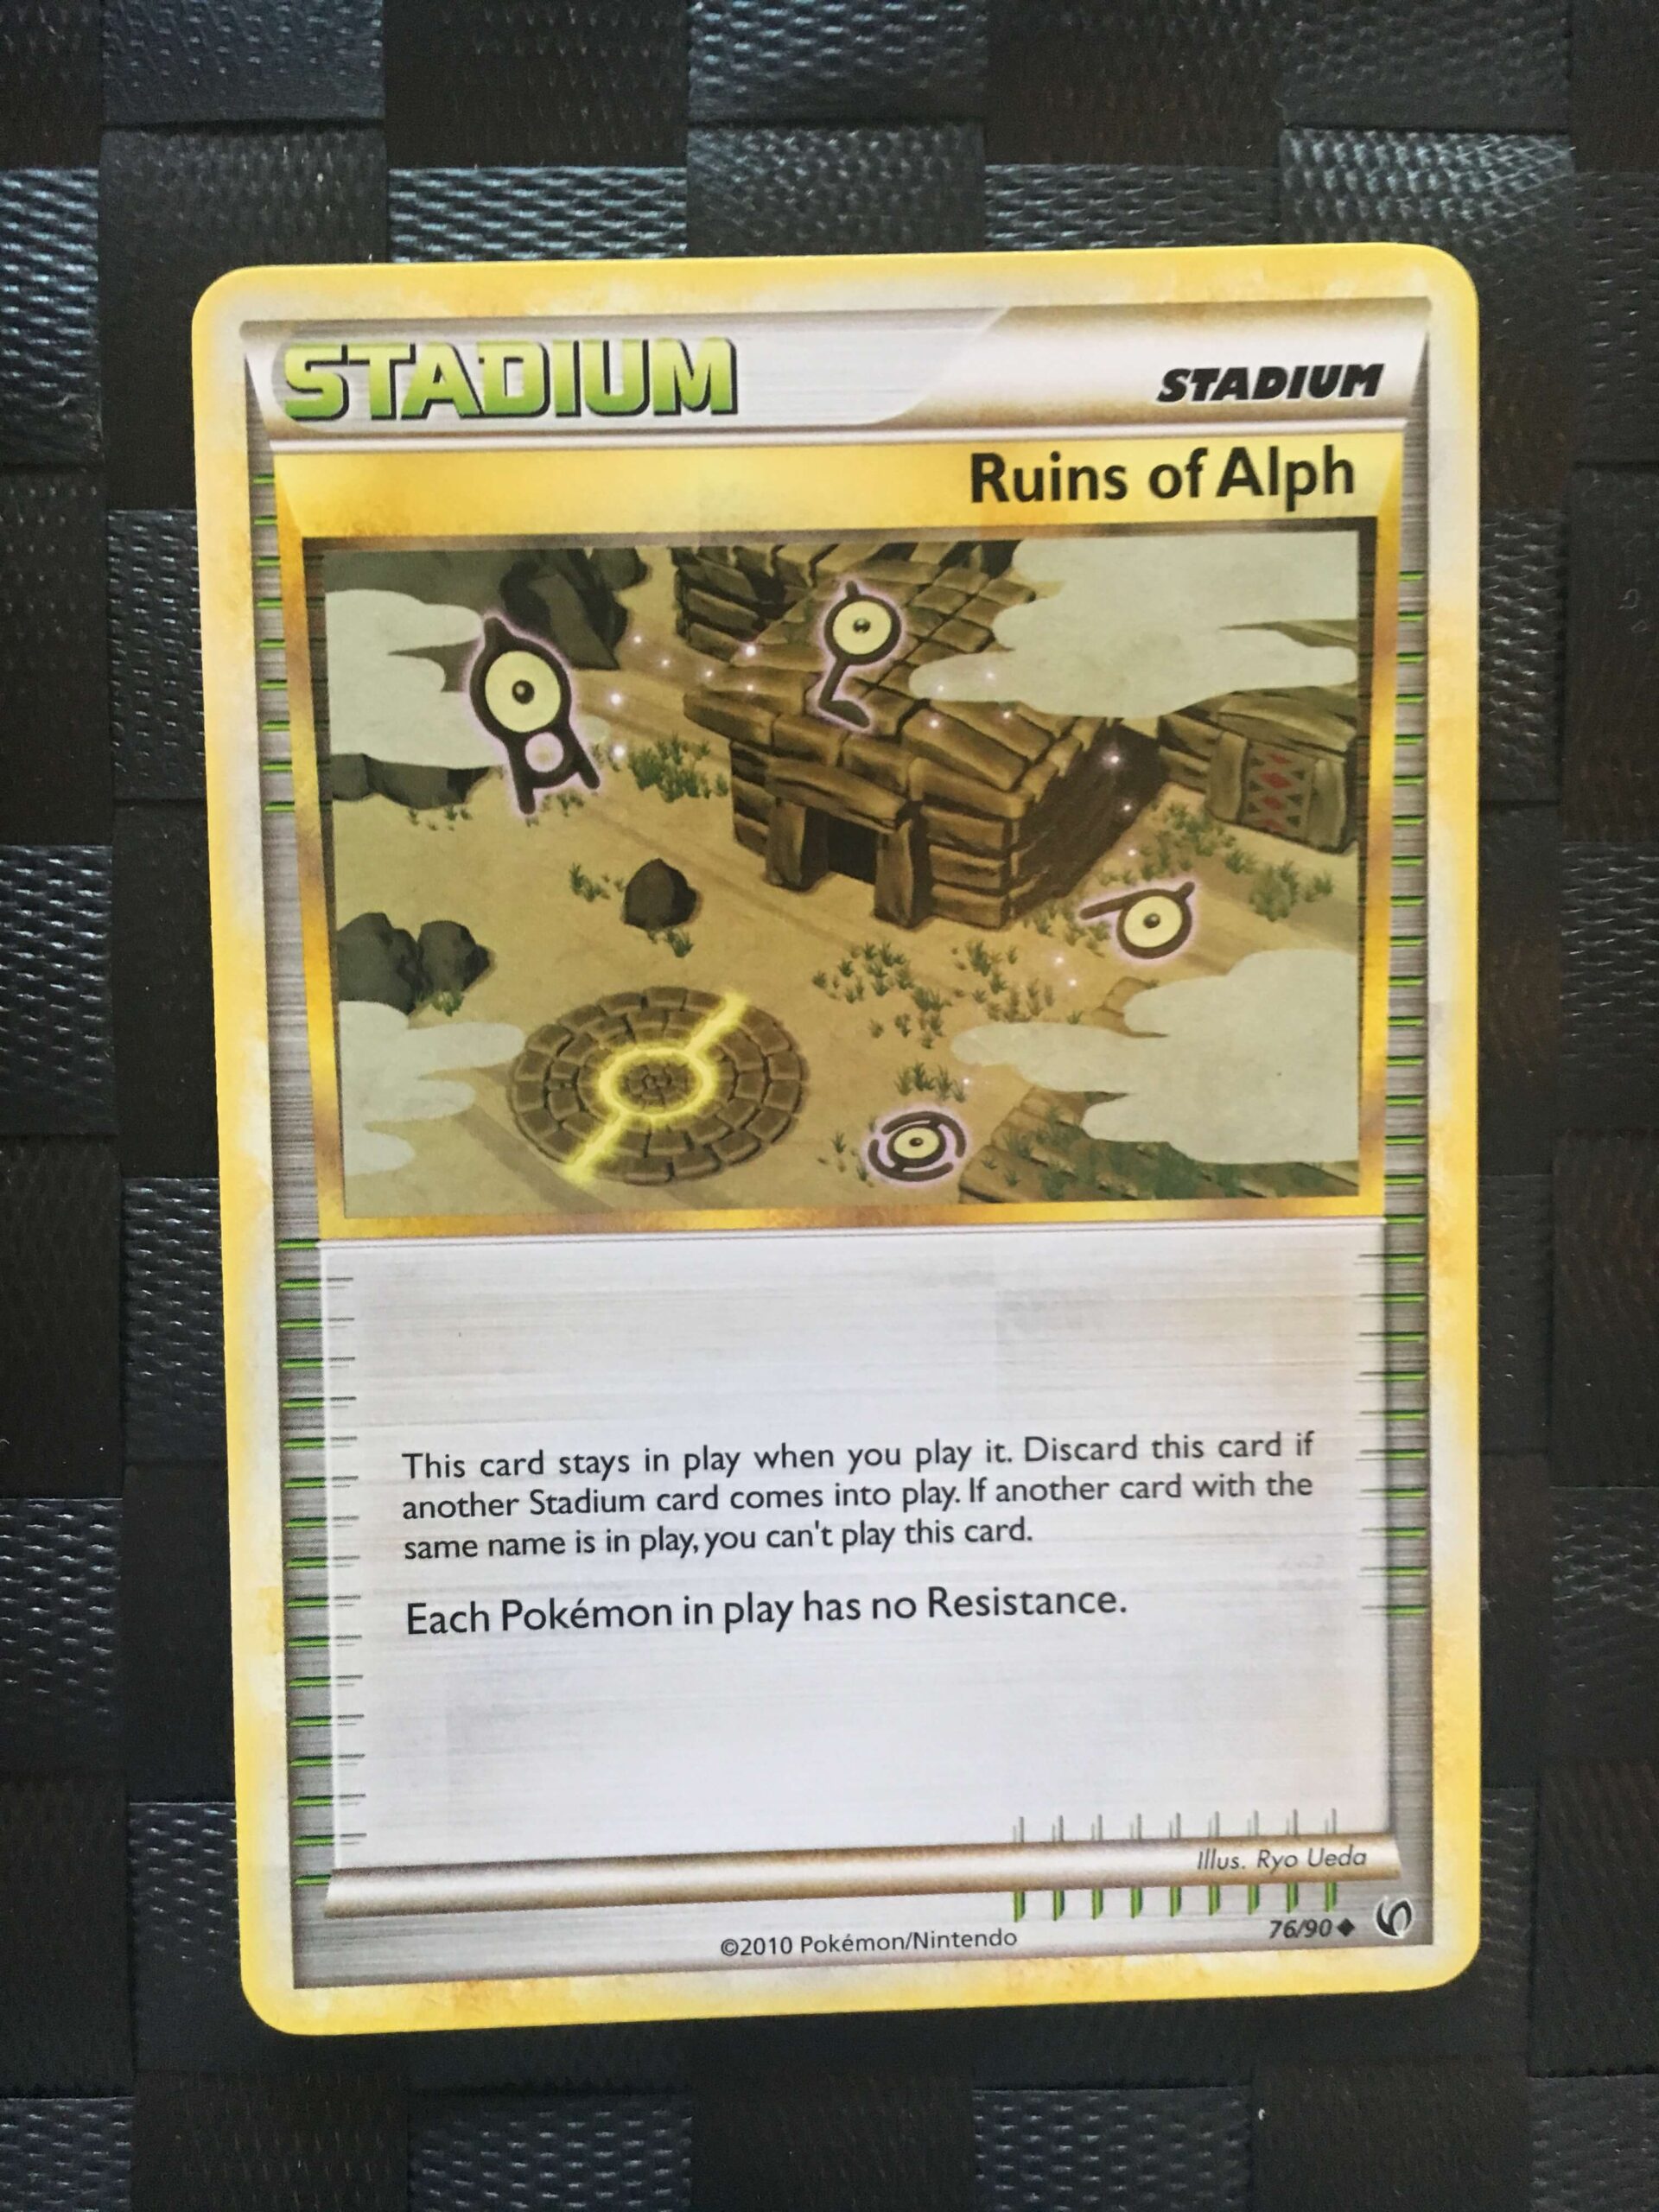 Ruins of Alph Uncommon Trainer HGSS Undaunted